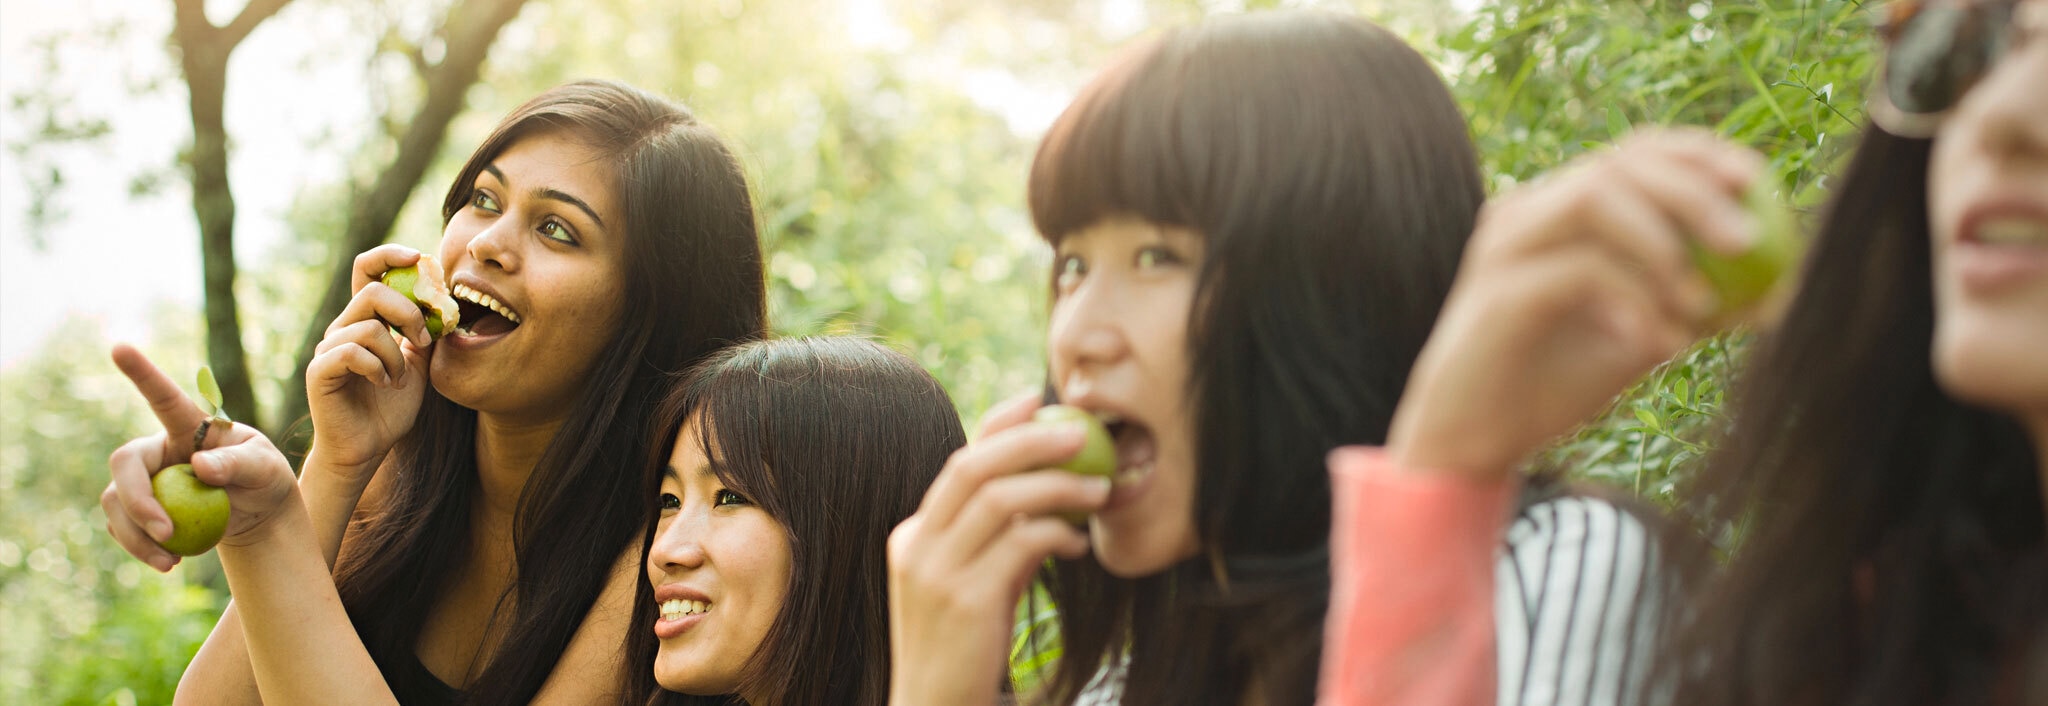 Four women, all with thick black hair, eating apples and pointing towards something in the distance.